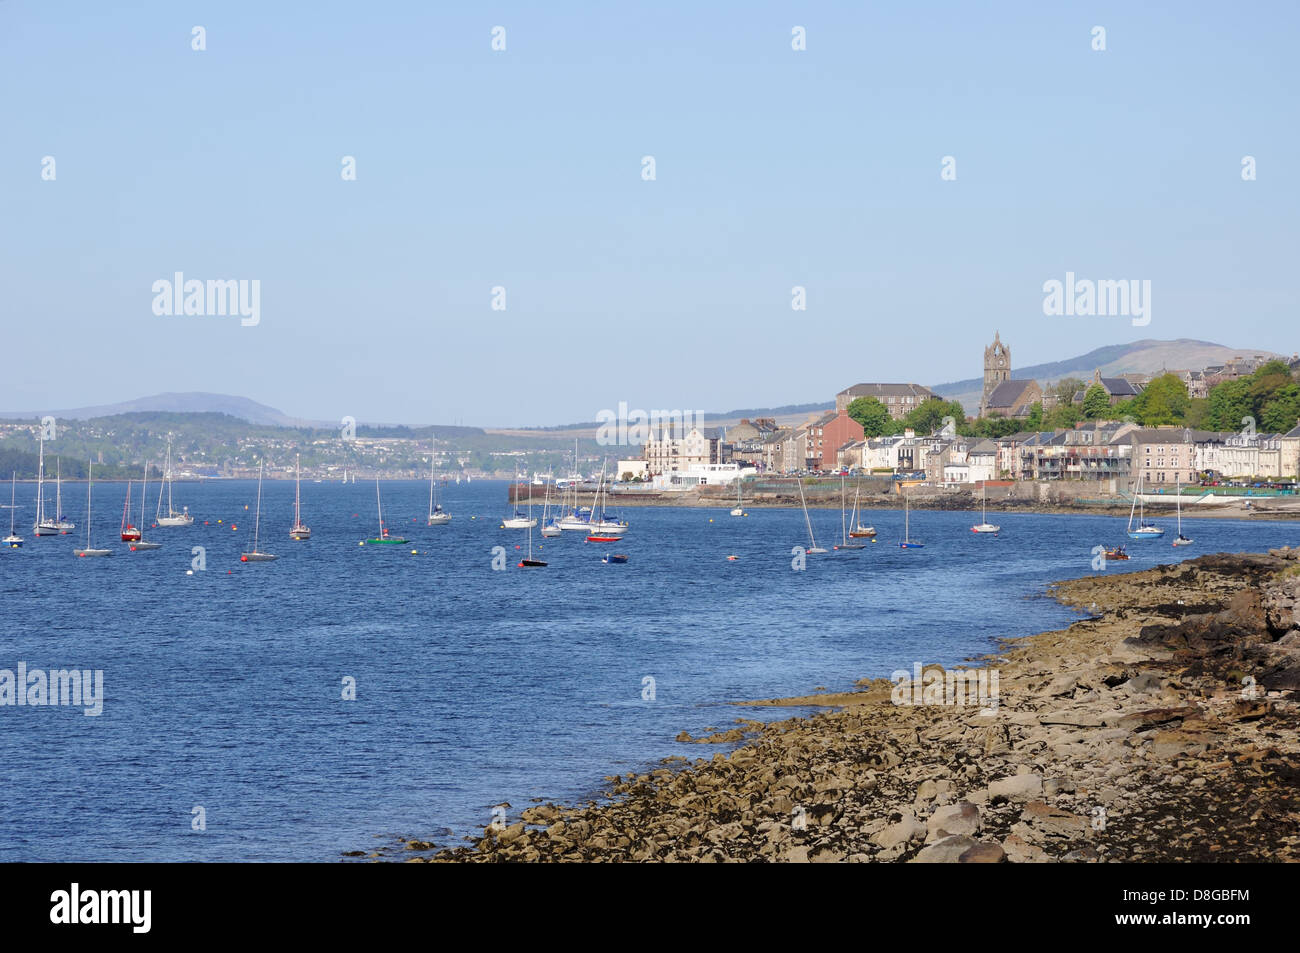 Seafront view of Gourock where small yachts are moored off the rocky shore Stock Photo